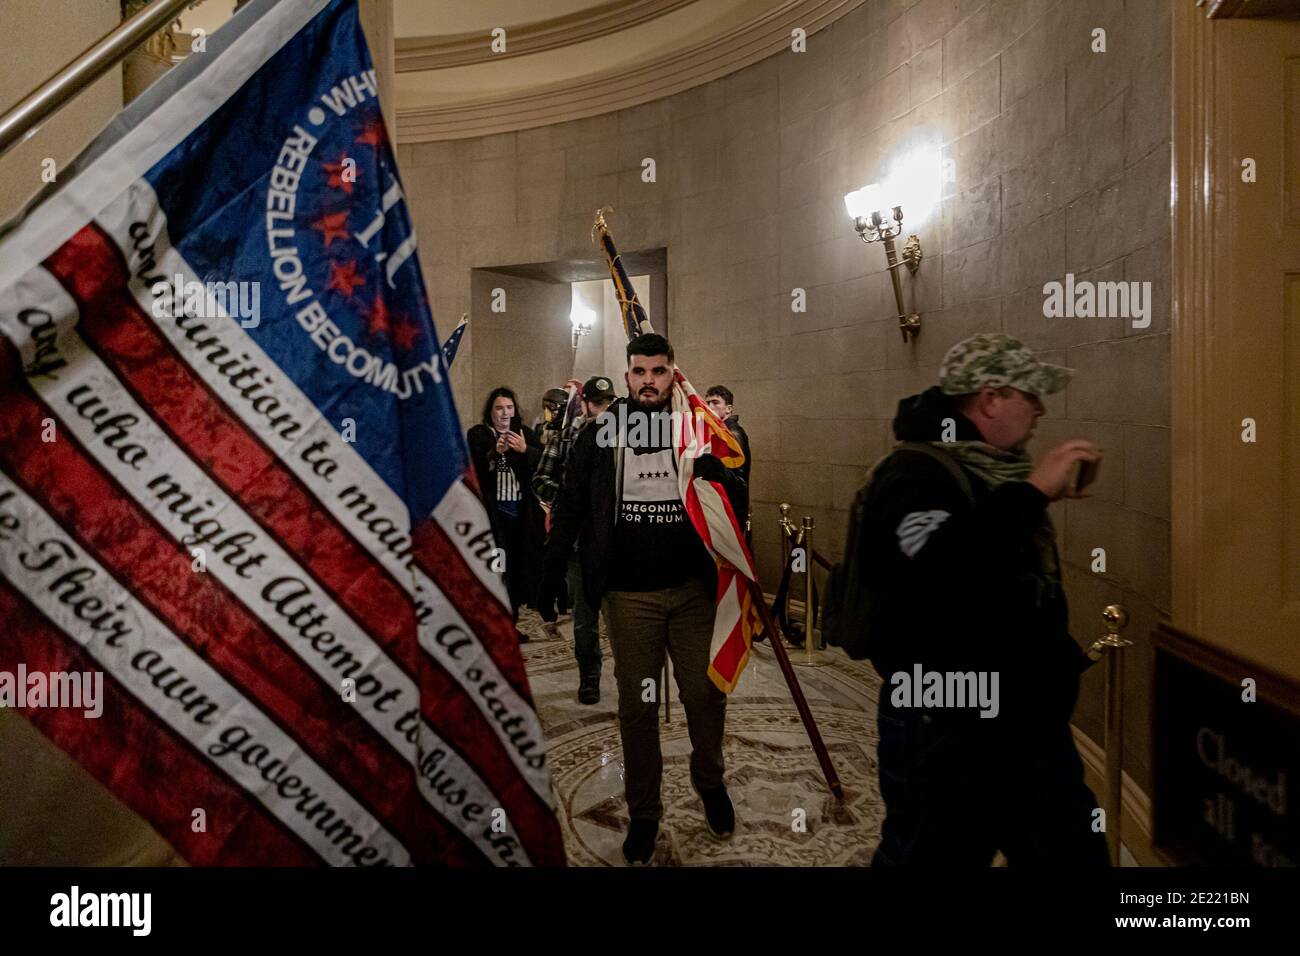 On January 6, 2021, Pro-Trump supporters and far-right forces flooded Washington DC to protest Donald Trump's election loss. Hundreds battled Capitol Police and breached the U.S. Capitol Building. (Photo by Michael Nigro/Sipa USA) Stock Photo